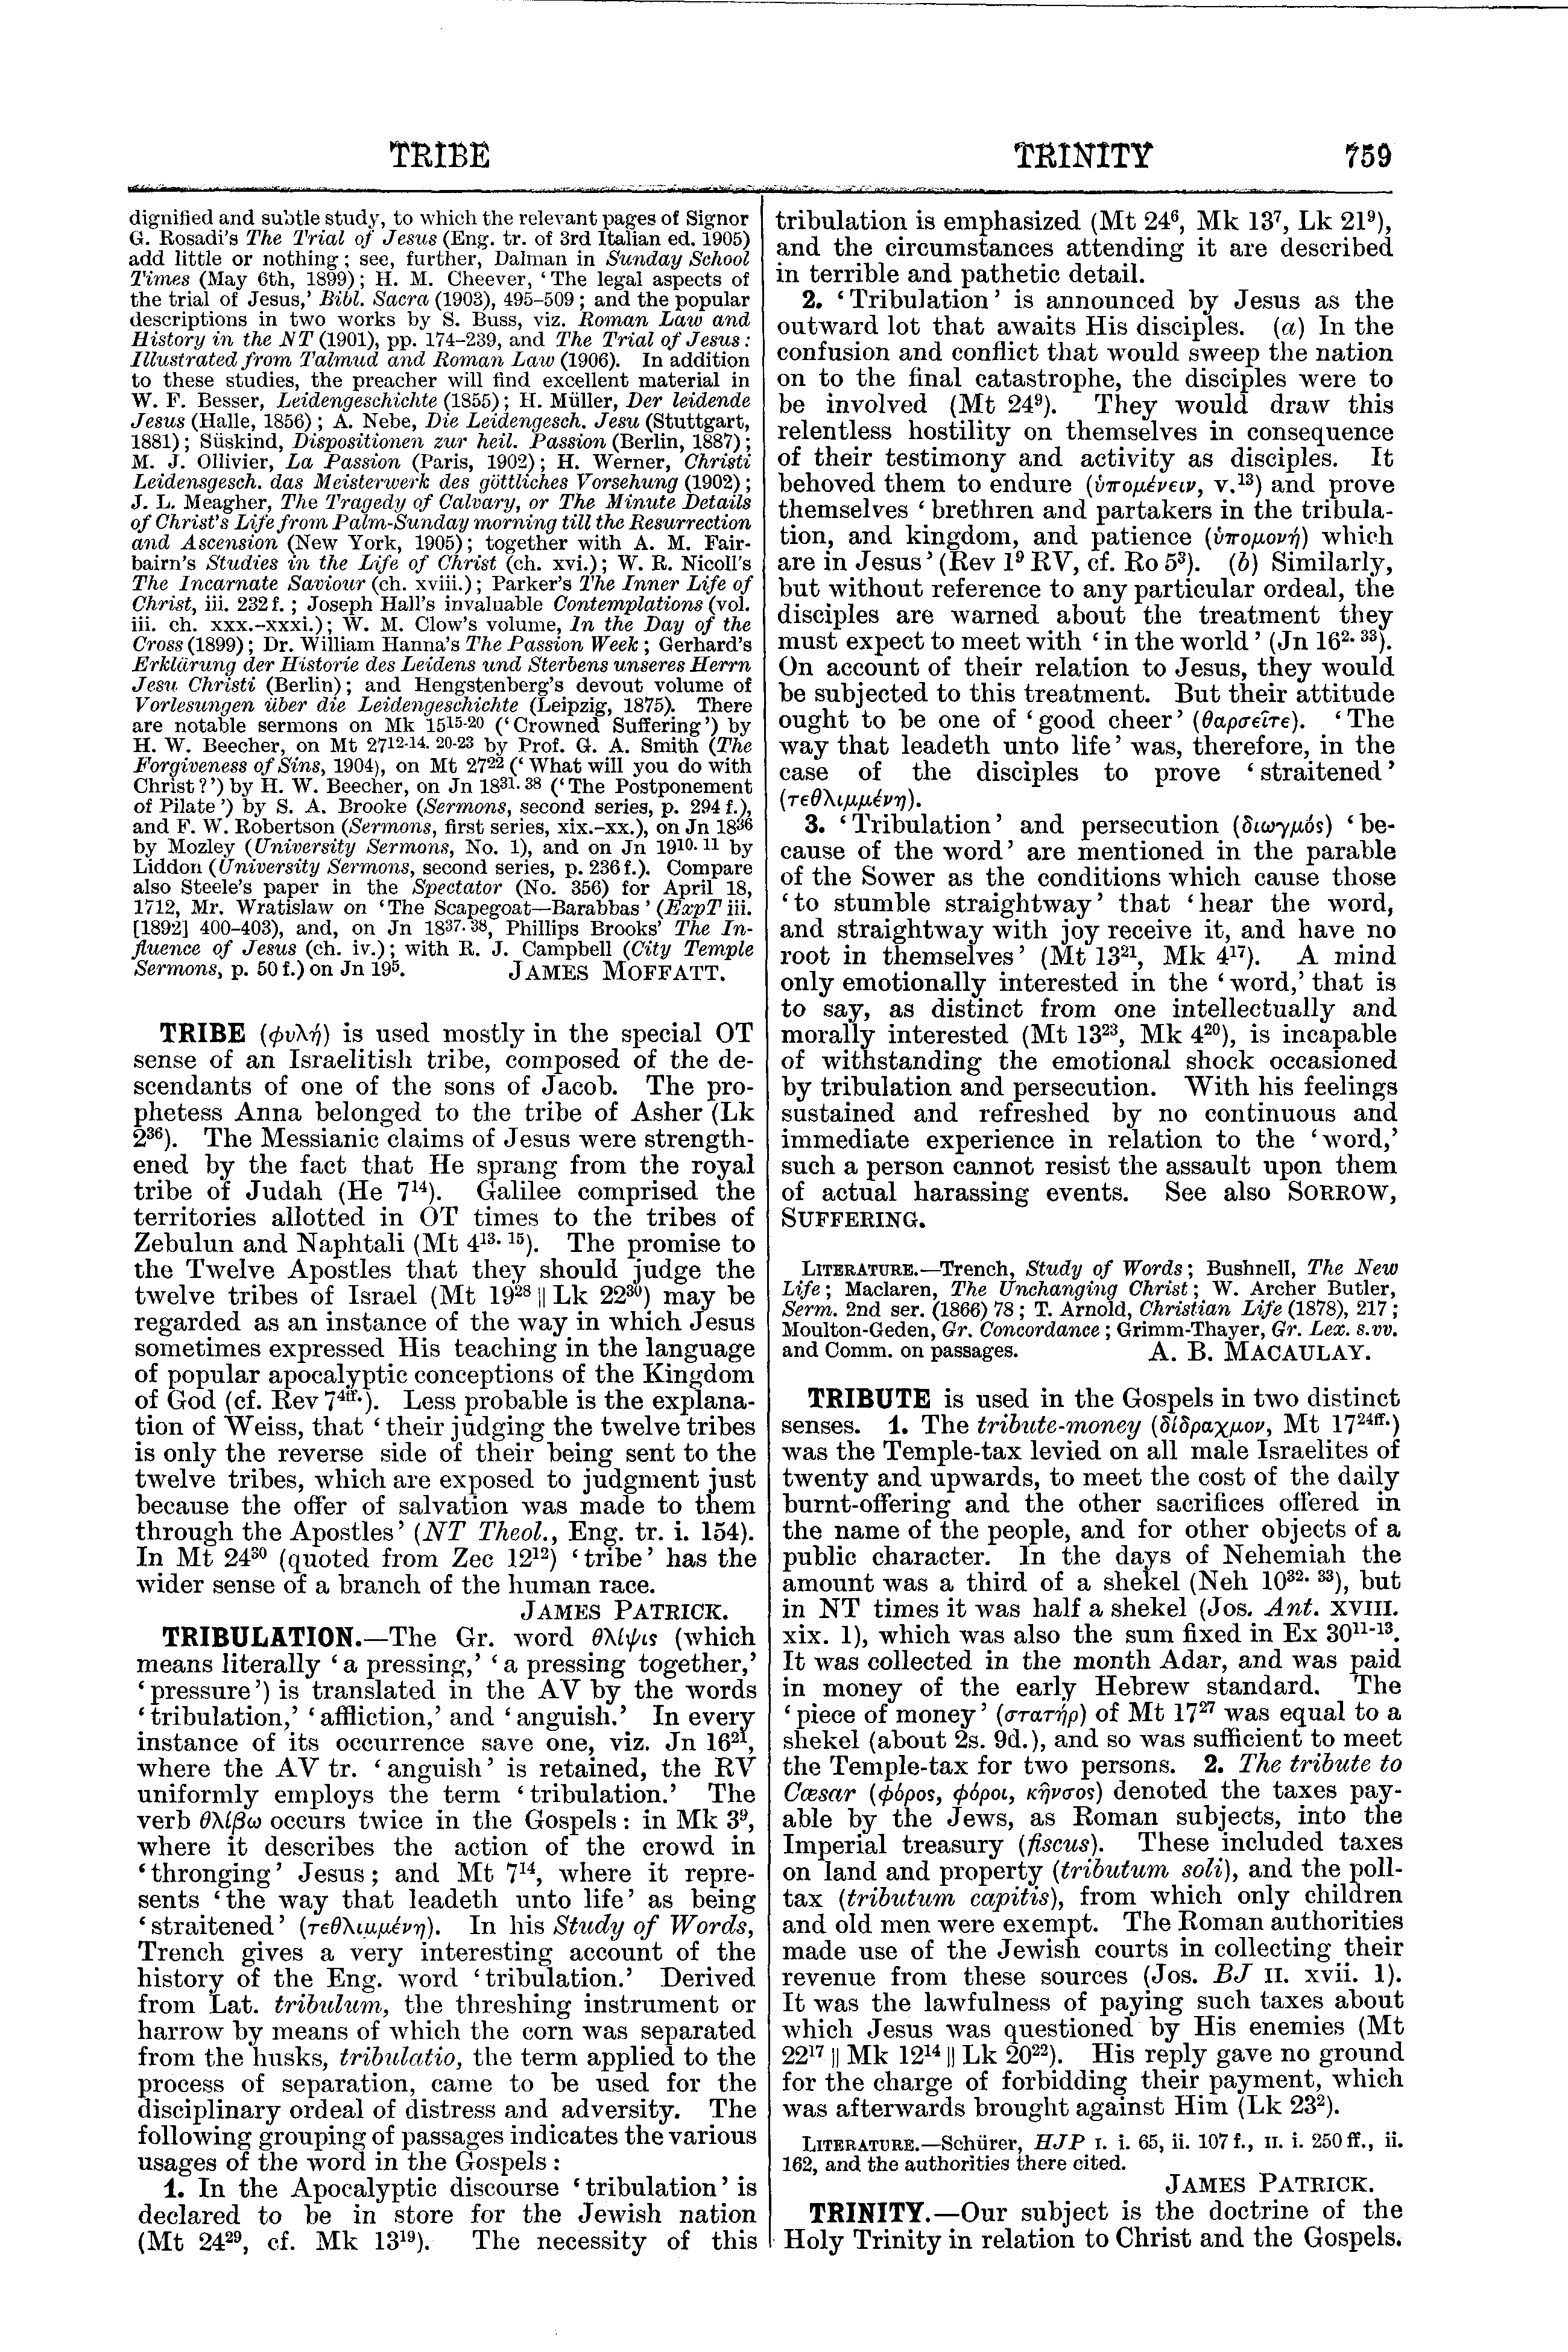 Image of page 759